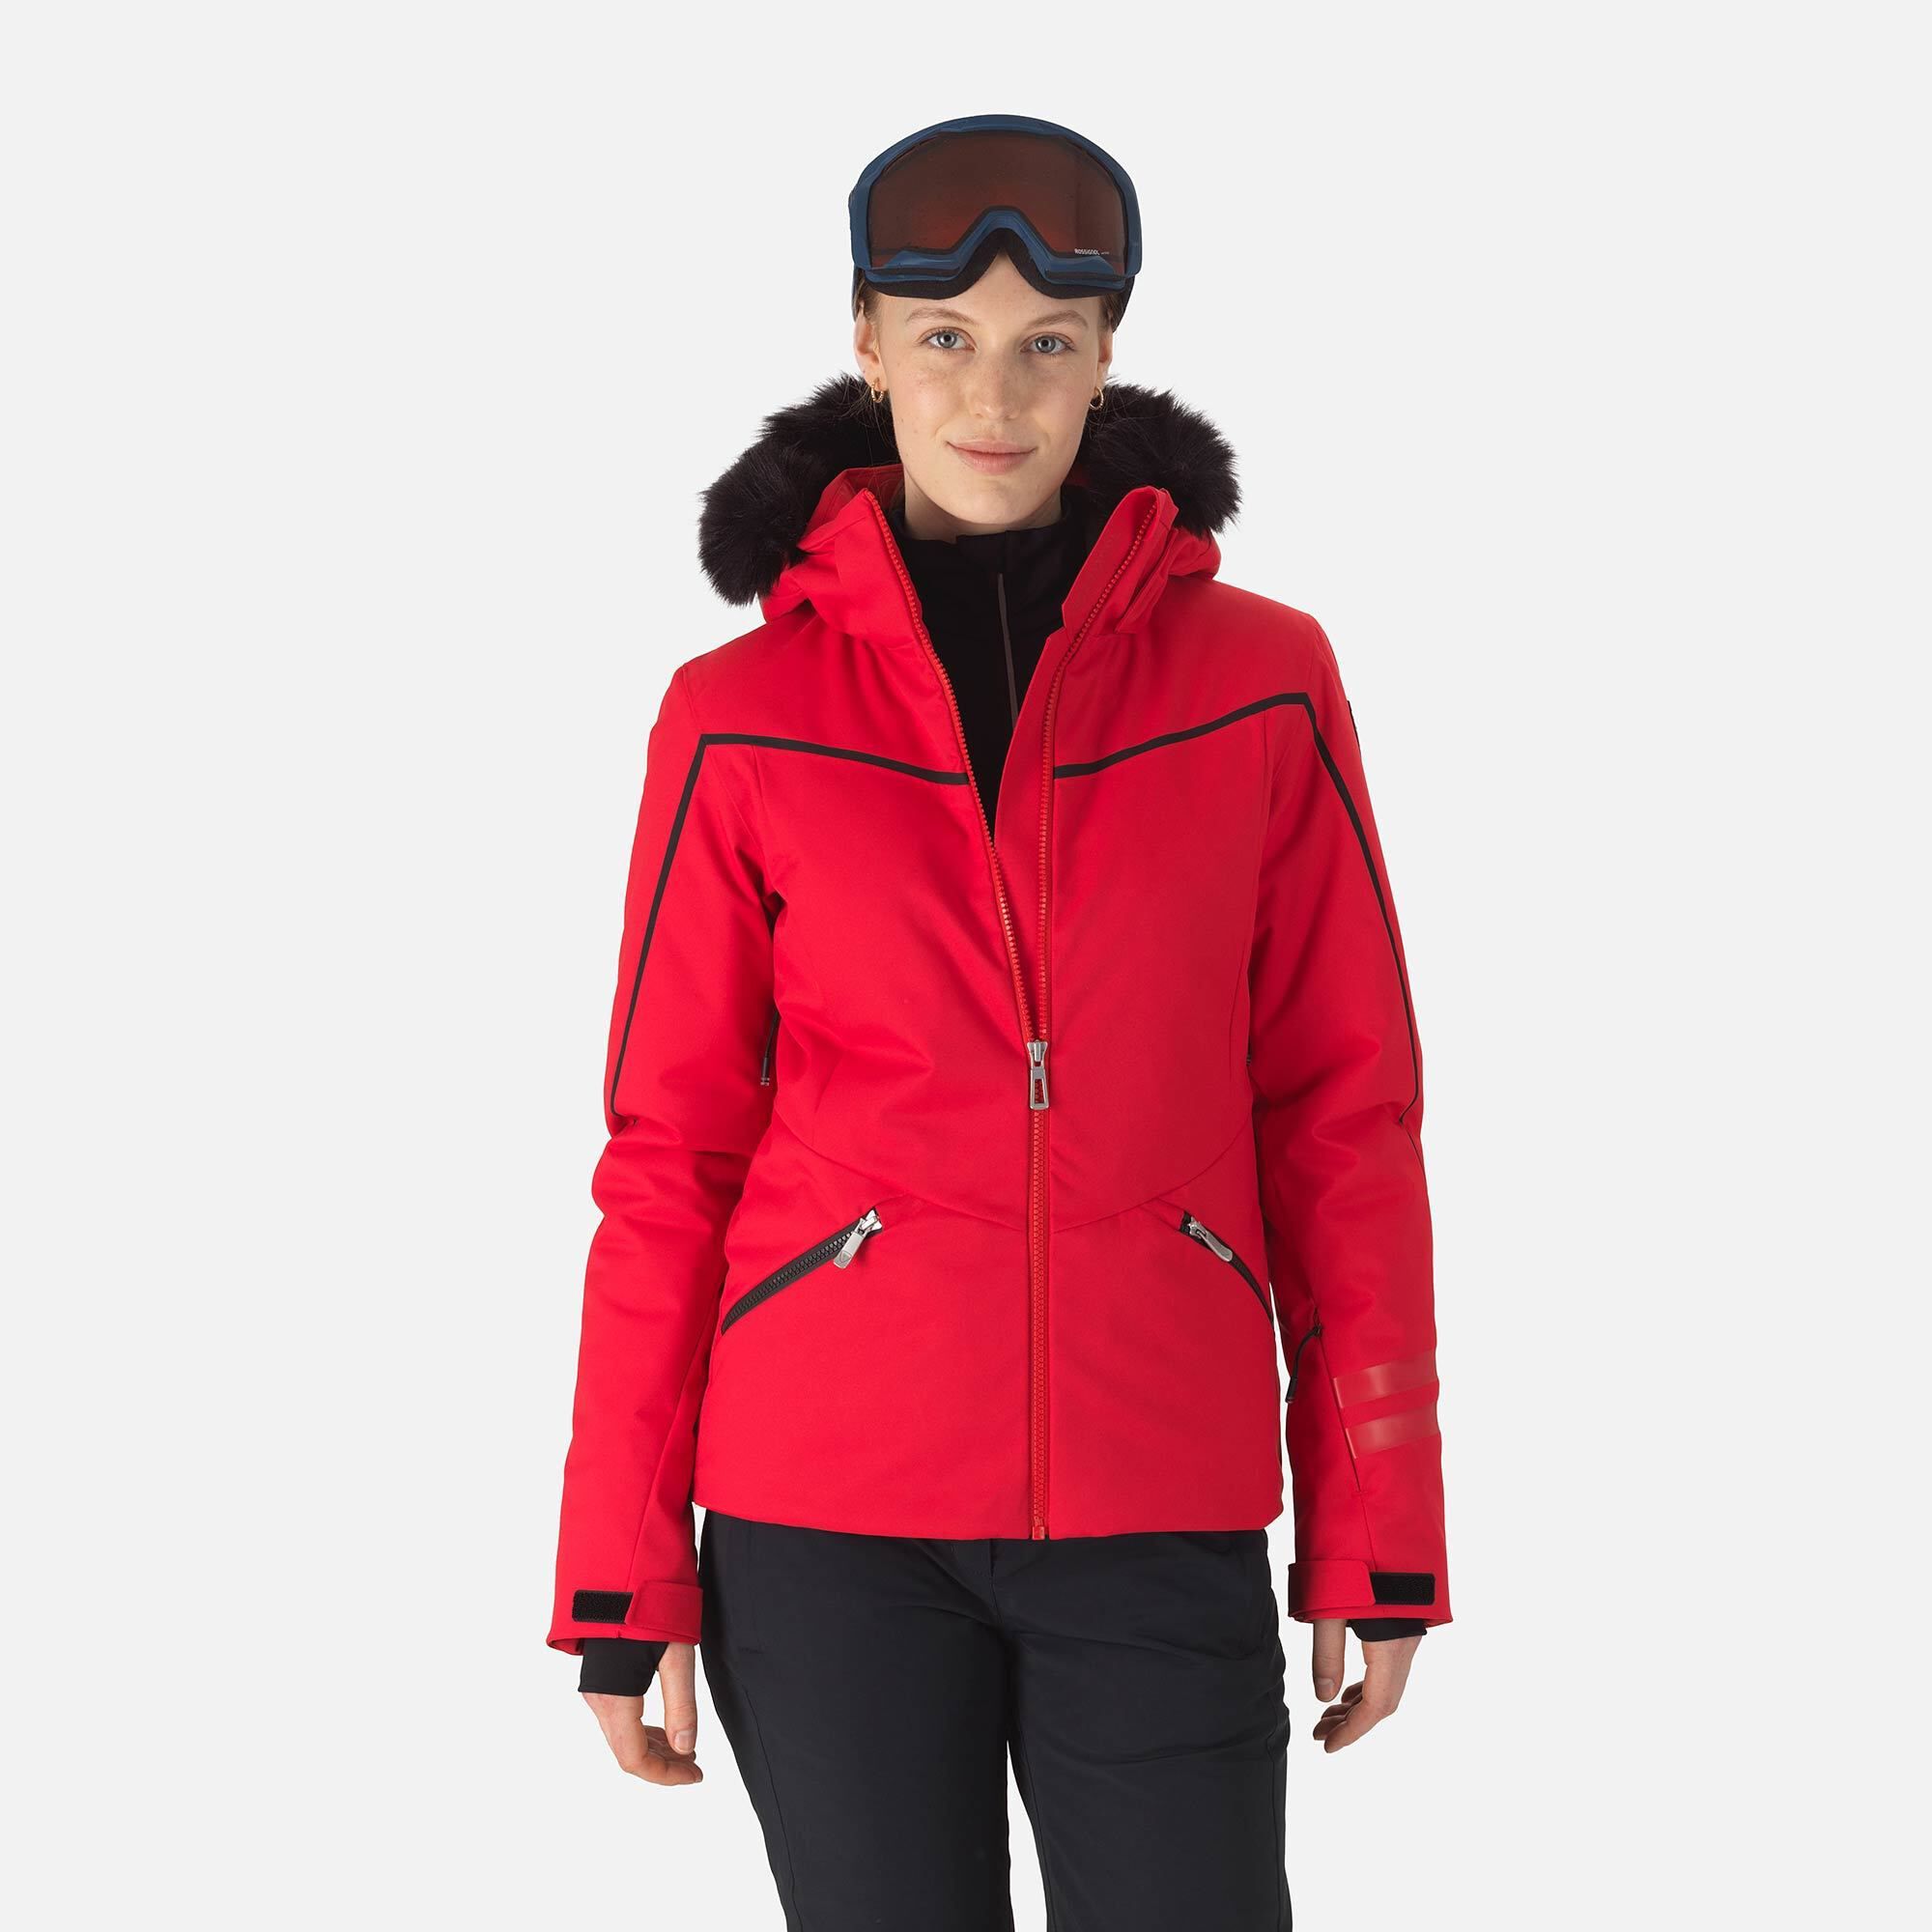 Buy Mode By Red Tape Women Red Jacket_MJS0008-S at Amazon.in